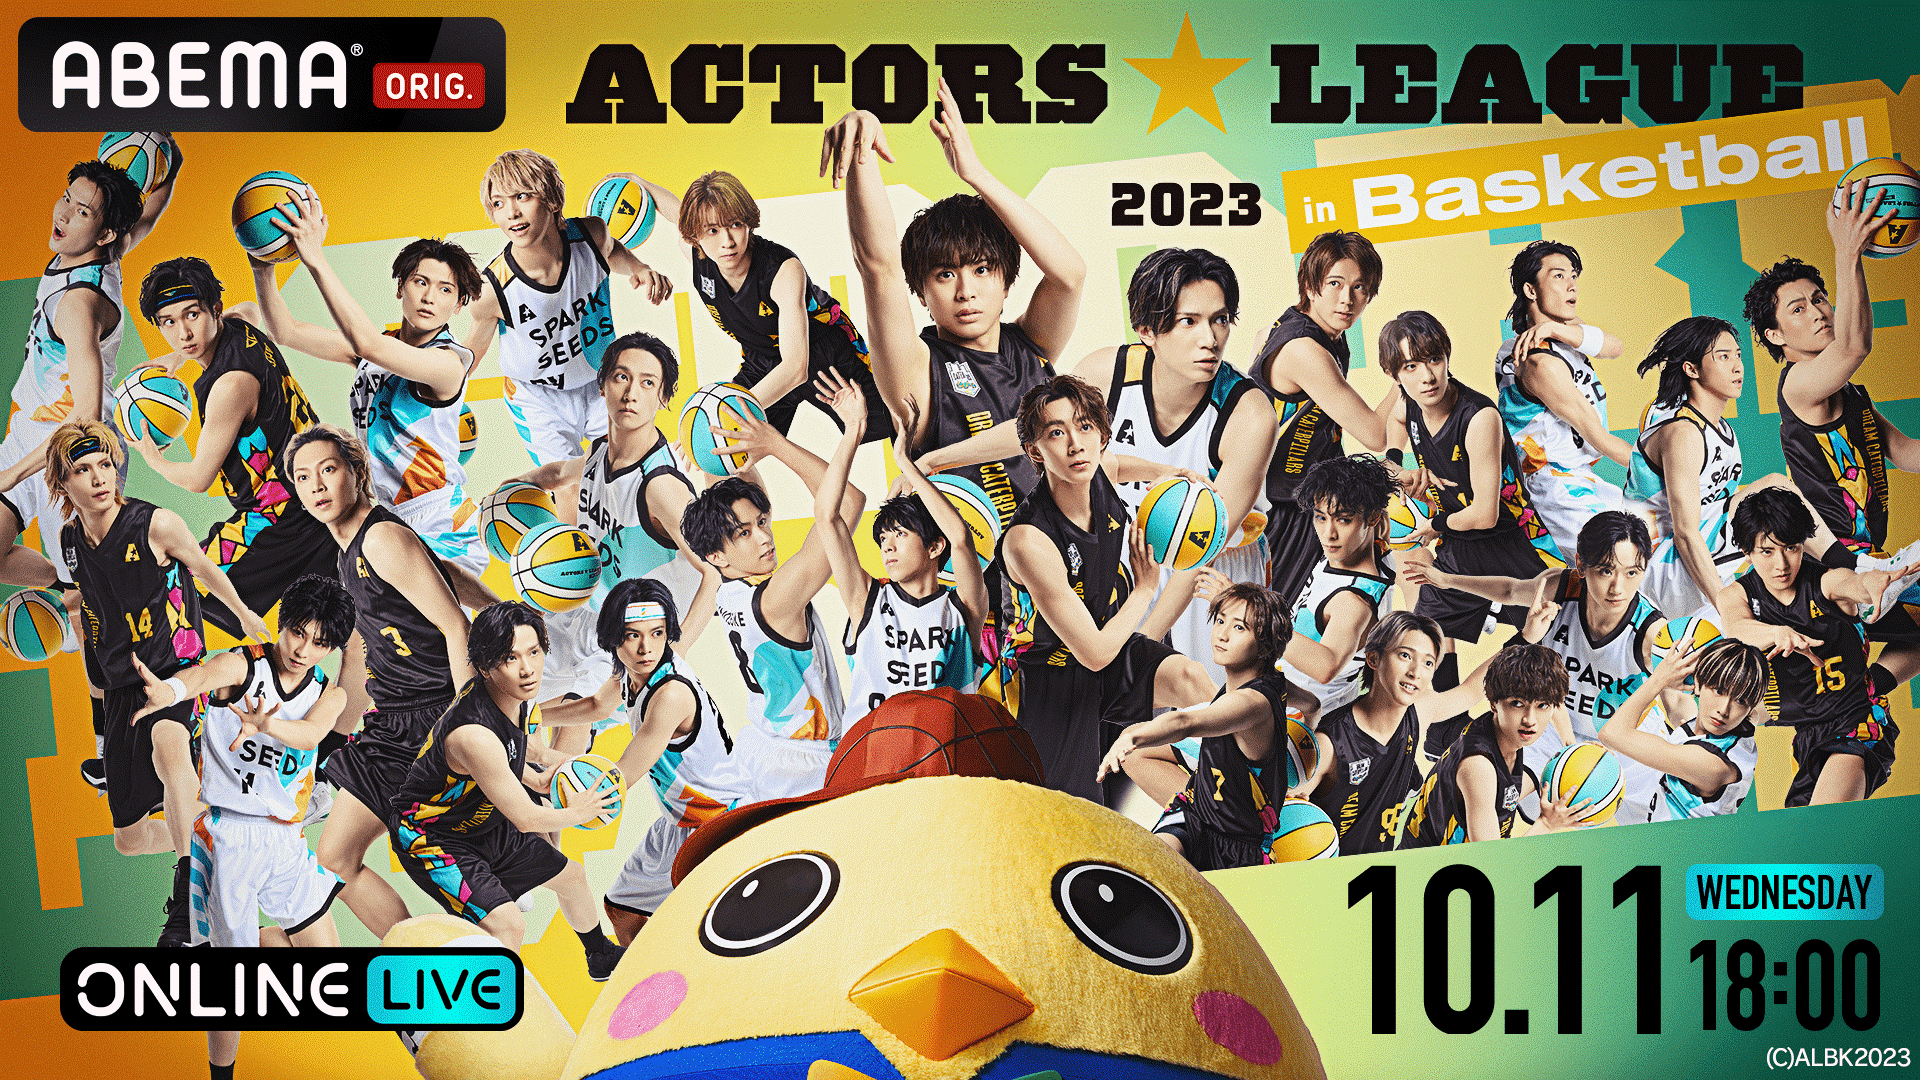 ACTORS LEAGUE SPARK SEEDS まとめ売り